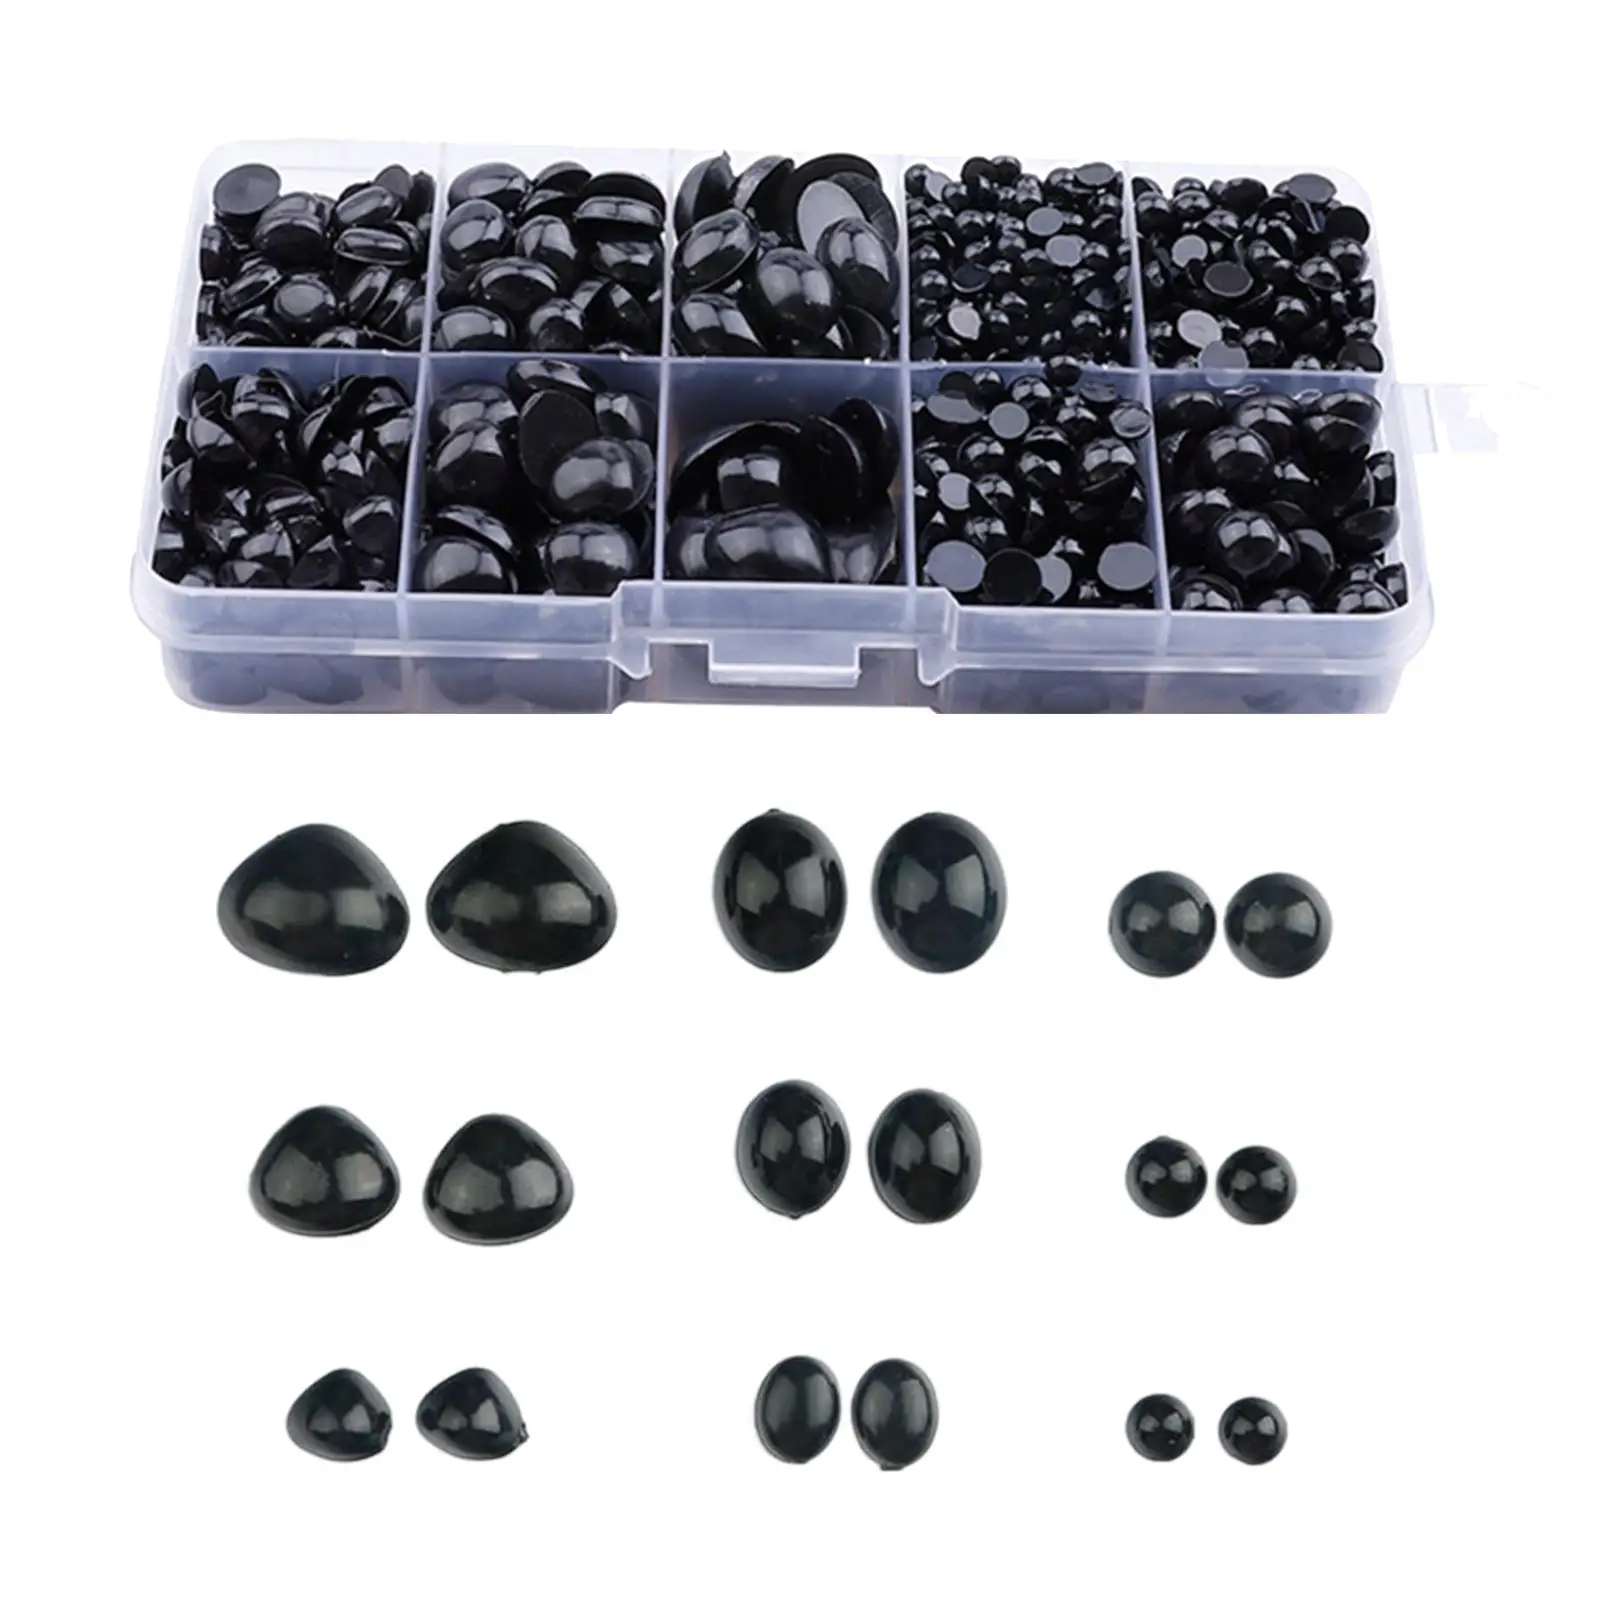 1000Pcs Plastic Safety Eyes and Noses DIY Crafts Sewing Supplies Scrapbook